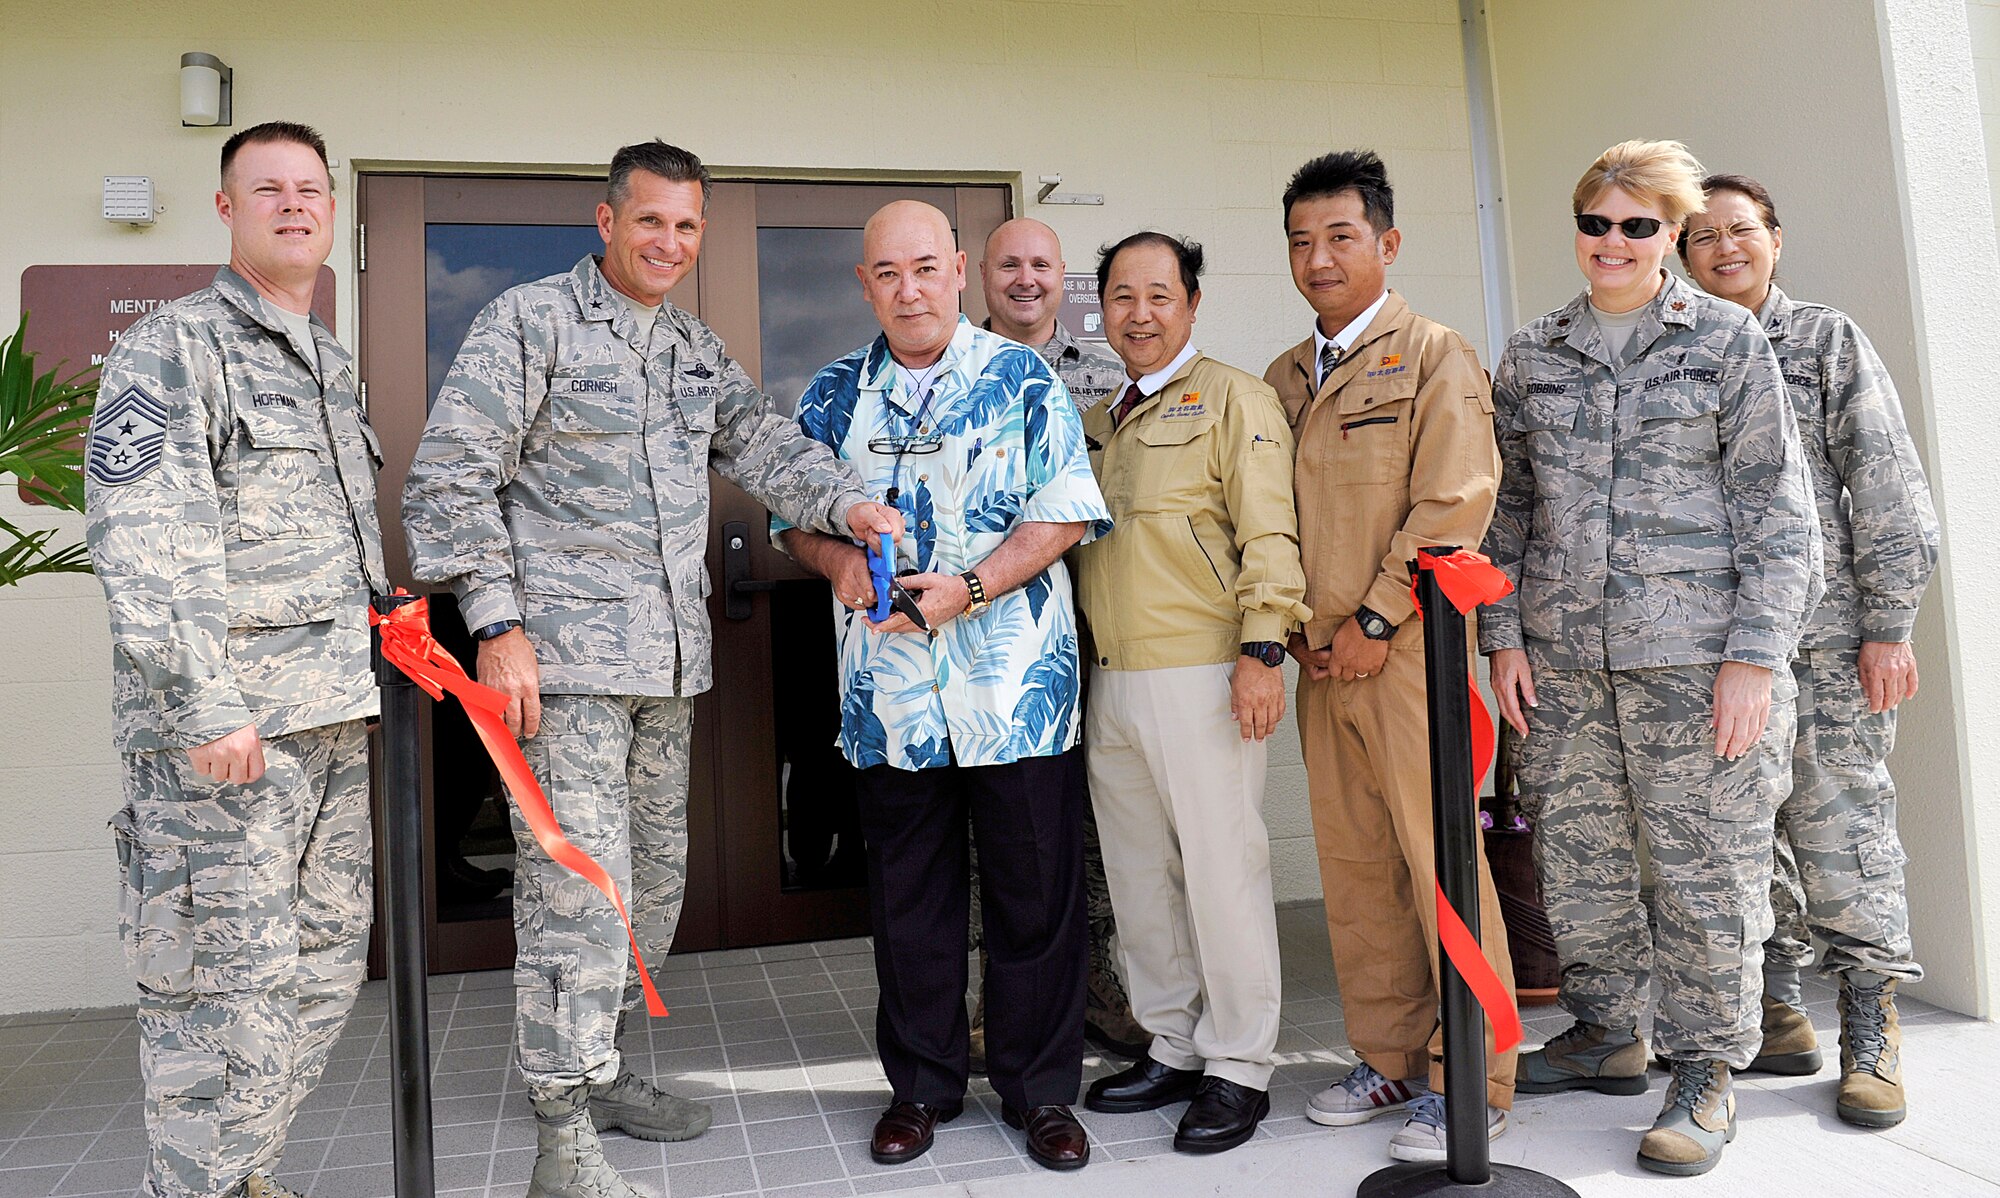 U.S. Air Force Brig. Gen. Barry Cornish, 18th Wing commander, and Karl Yamashiro, 18th Medical Group facilities administrator, cut a ribbon for the Mental Health Clinic relocation opening ceremony on Kadena Air Base, Japan, July 1, 2015. The Kadena Mental Health Clinic, previously located at Bldg. 856, has relocated to a newly renovated facility near Marek Park. The $4.3 million project was completed on May 26. (U.S. Air Force photo by Naoto Anazawa)